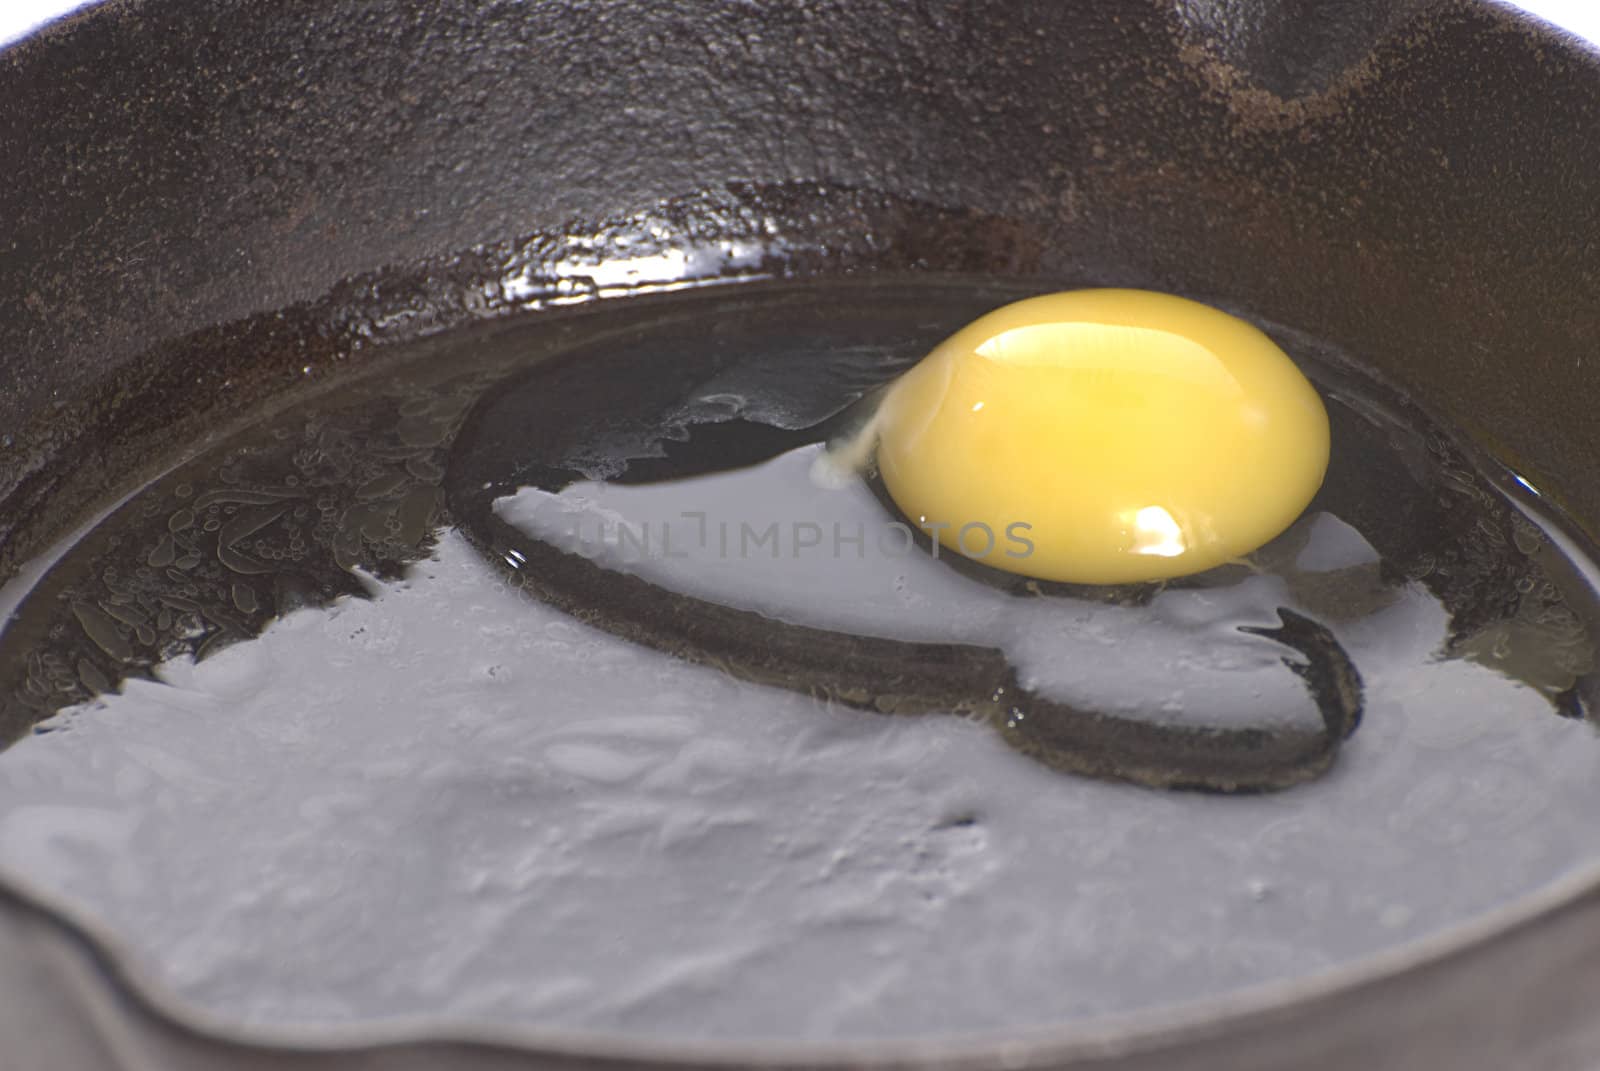 Closeup view of a fresh egg frying in the bottom of a cast iron pan